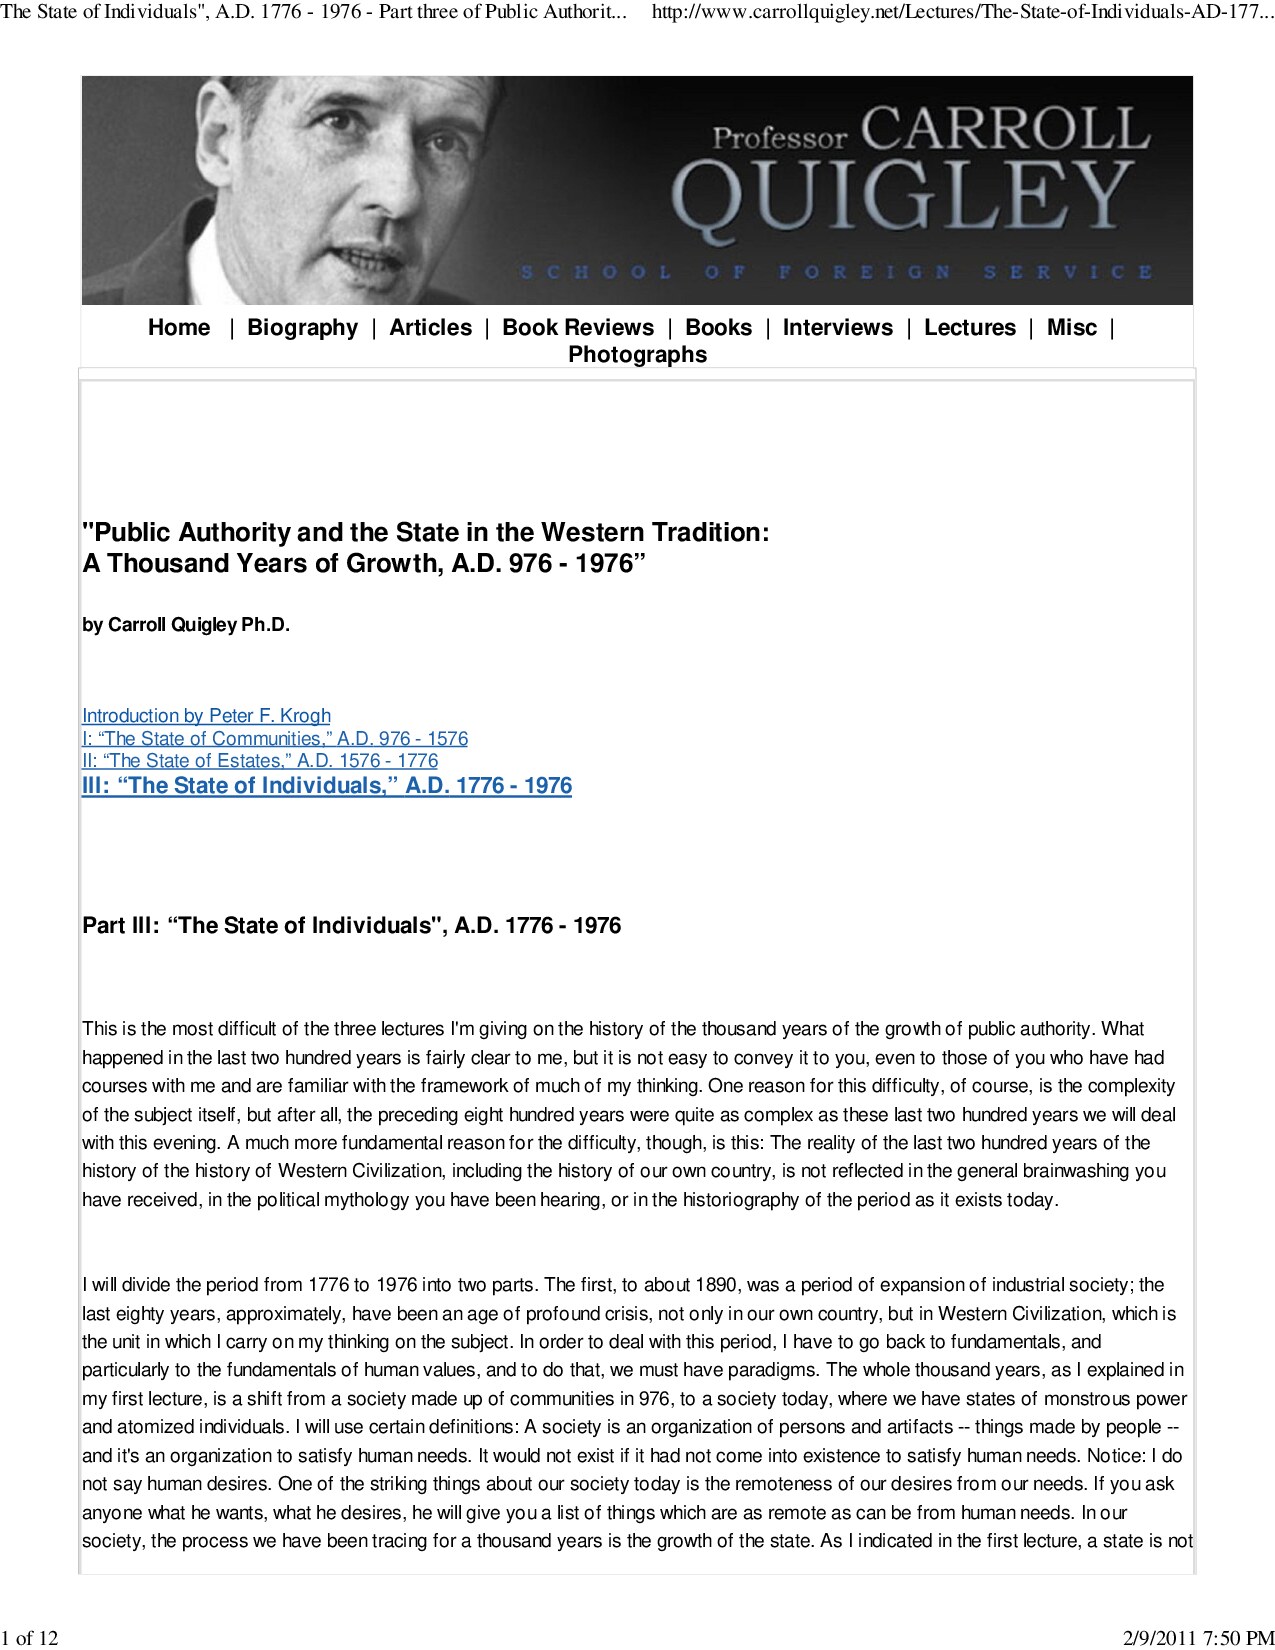 The State of Individuals", A.D. 1776 - 1976 - Part three of Public Authority and the State in the Western Tradition: A Thousand Years of Growth, A.D. 976 - 1976 - A Lecture by Carroll Quigley Ph.D.